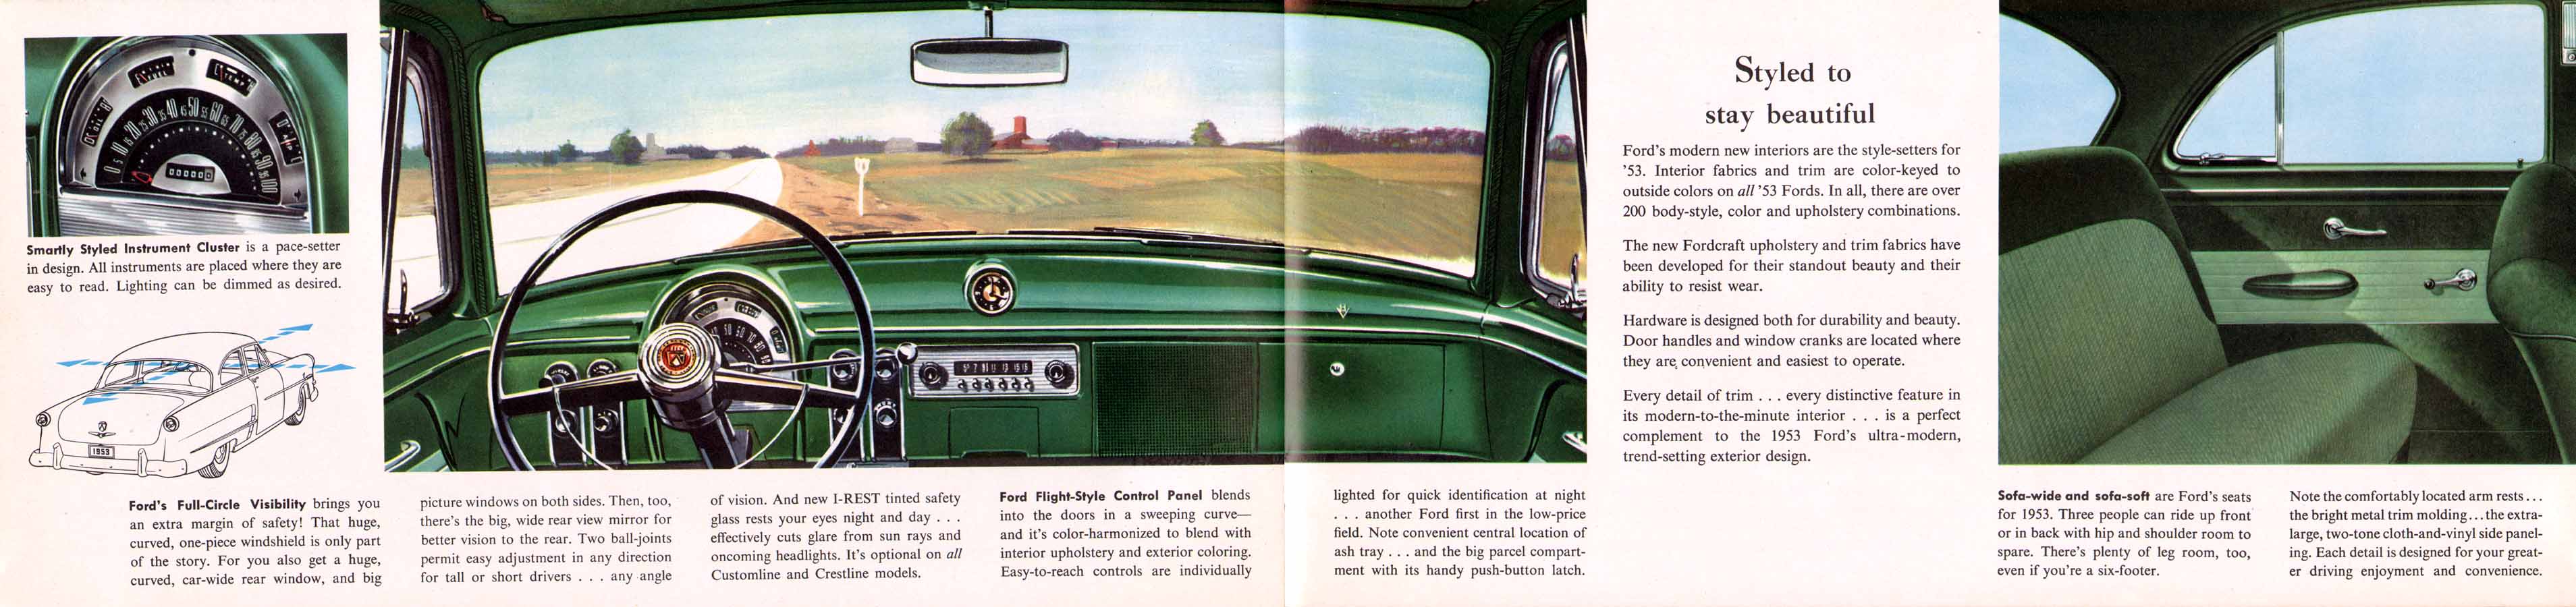 1953 Ford-26-27